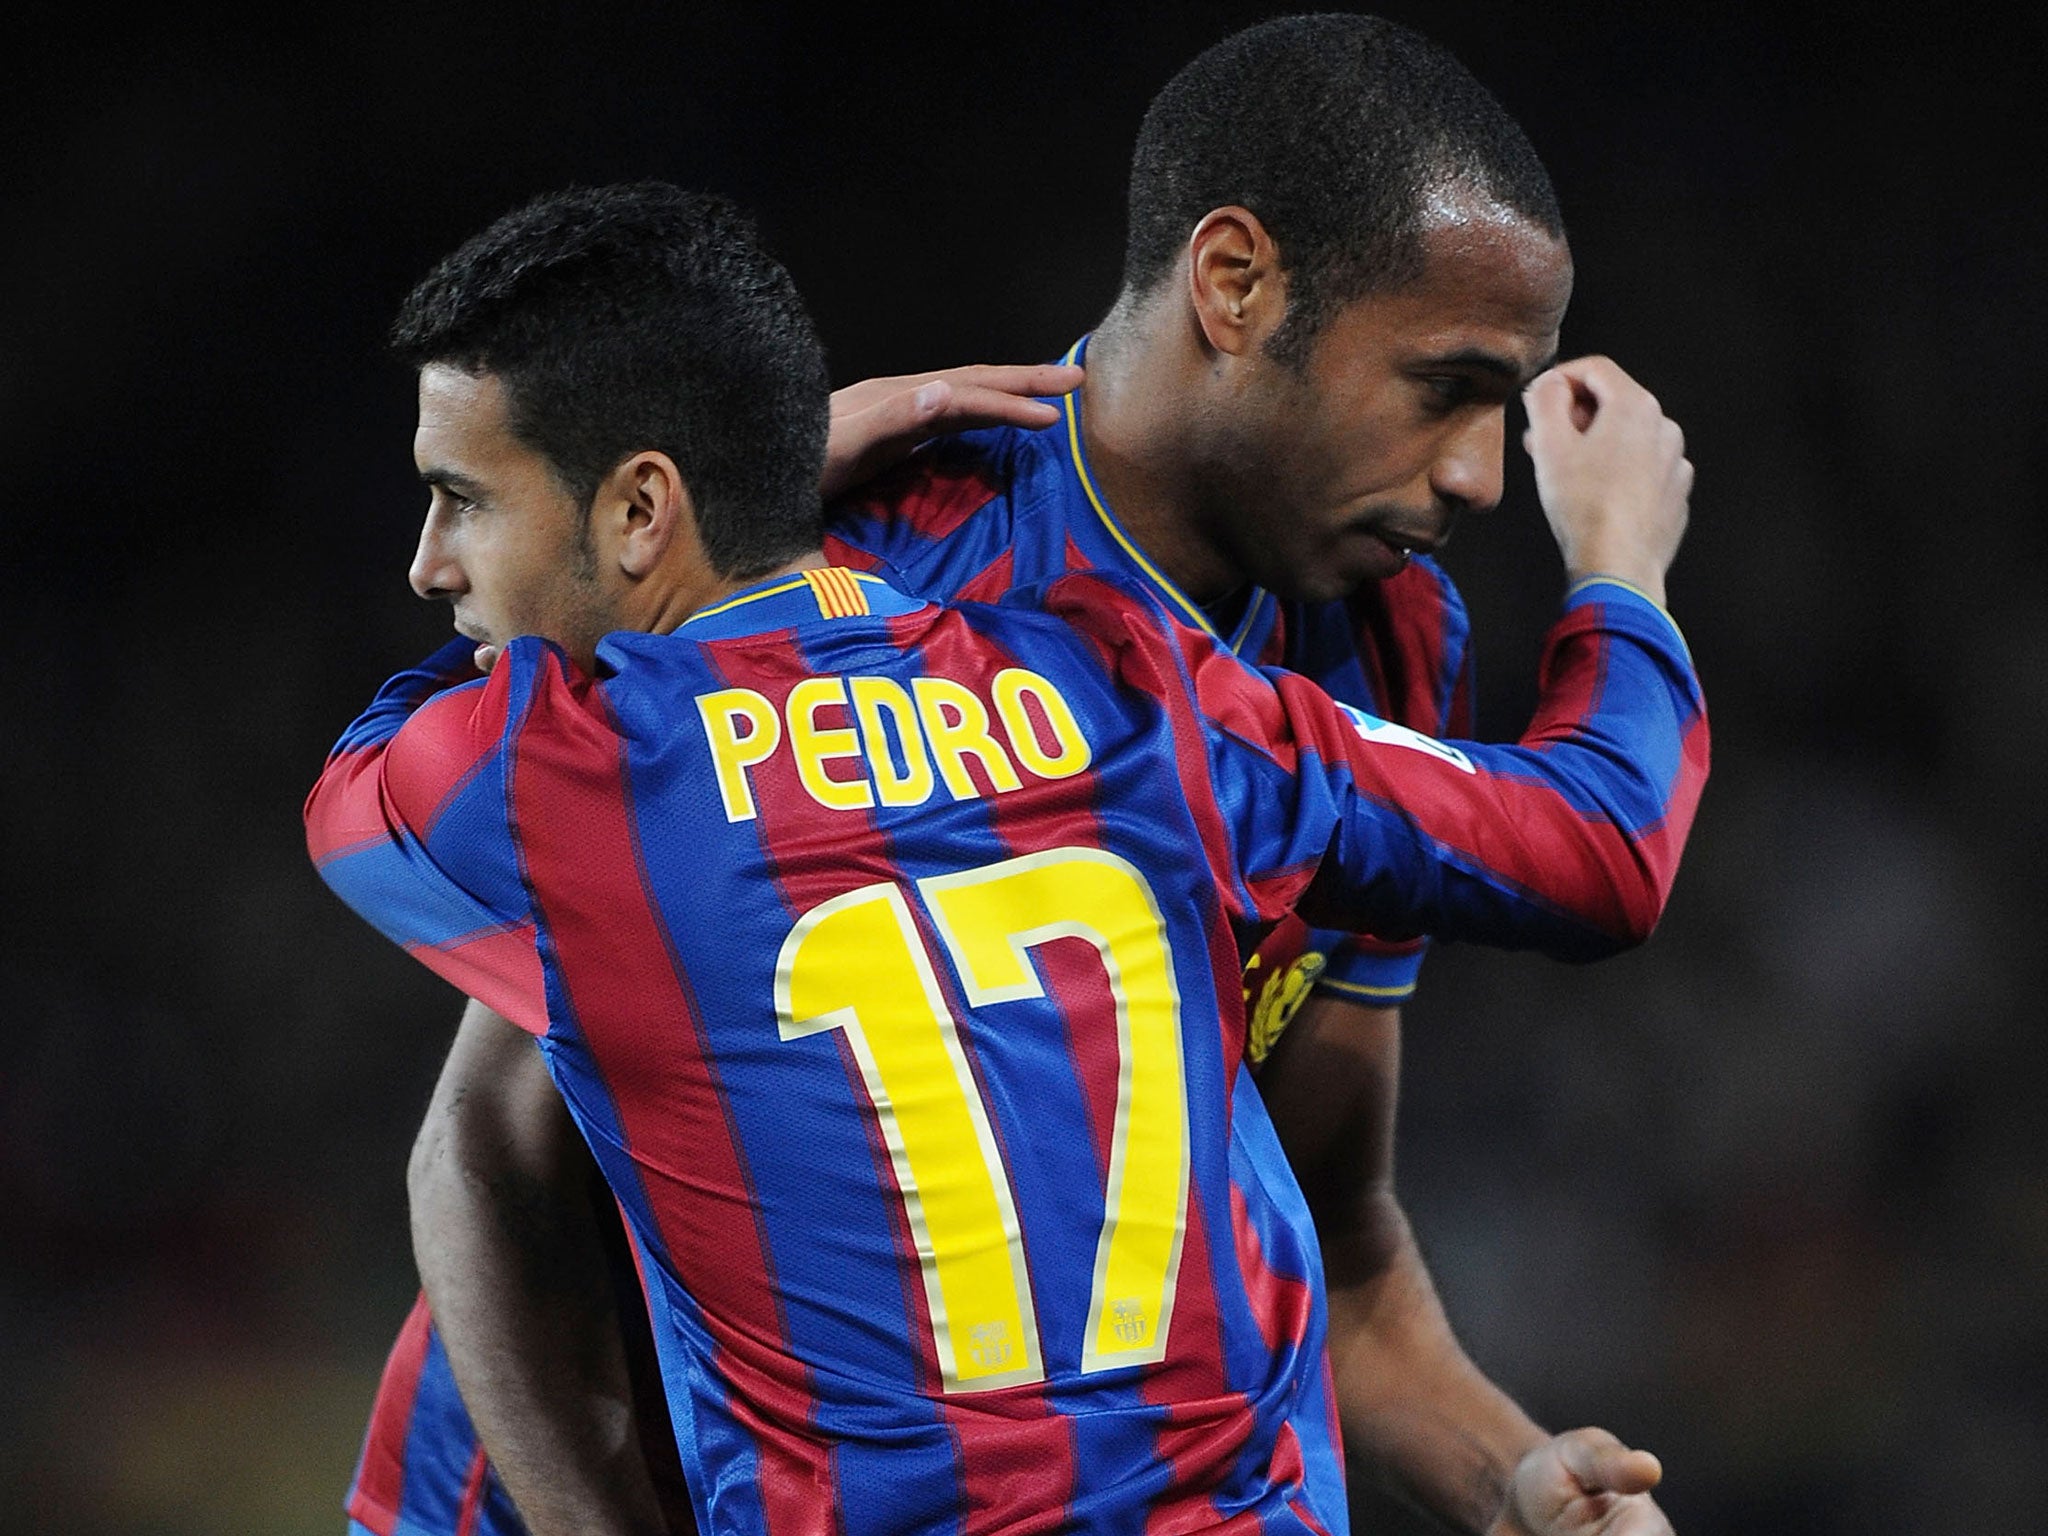 Pedro comes on for Thierry Henry during Barcelona's match against Racing Santander in 2010